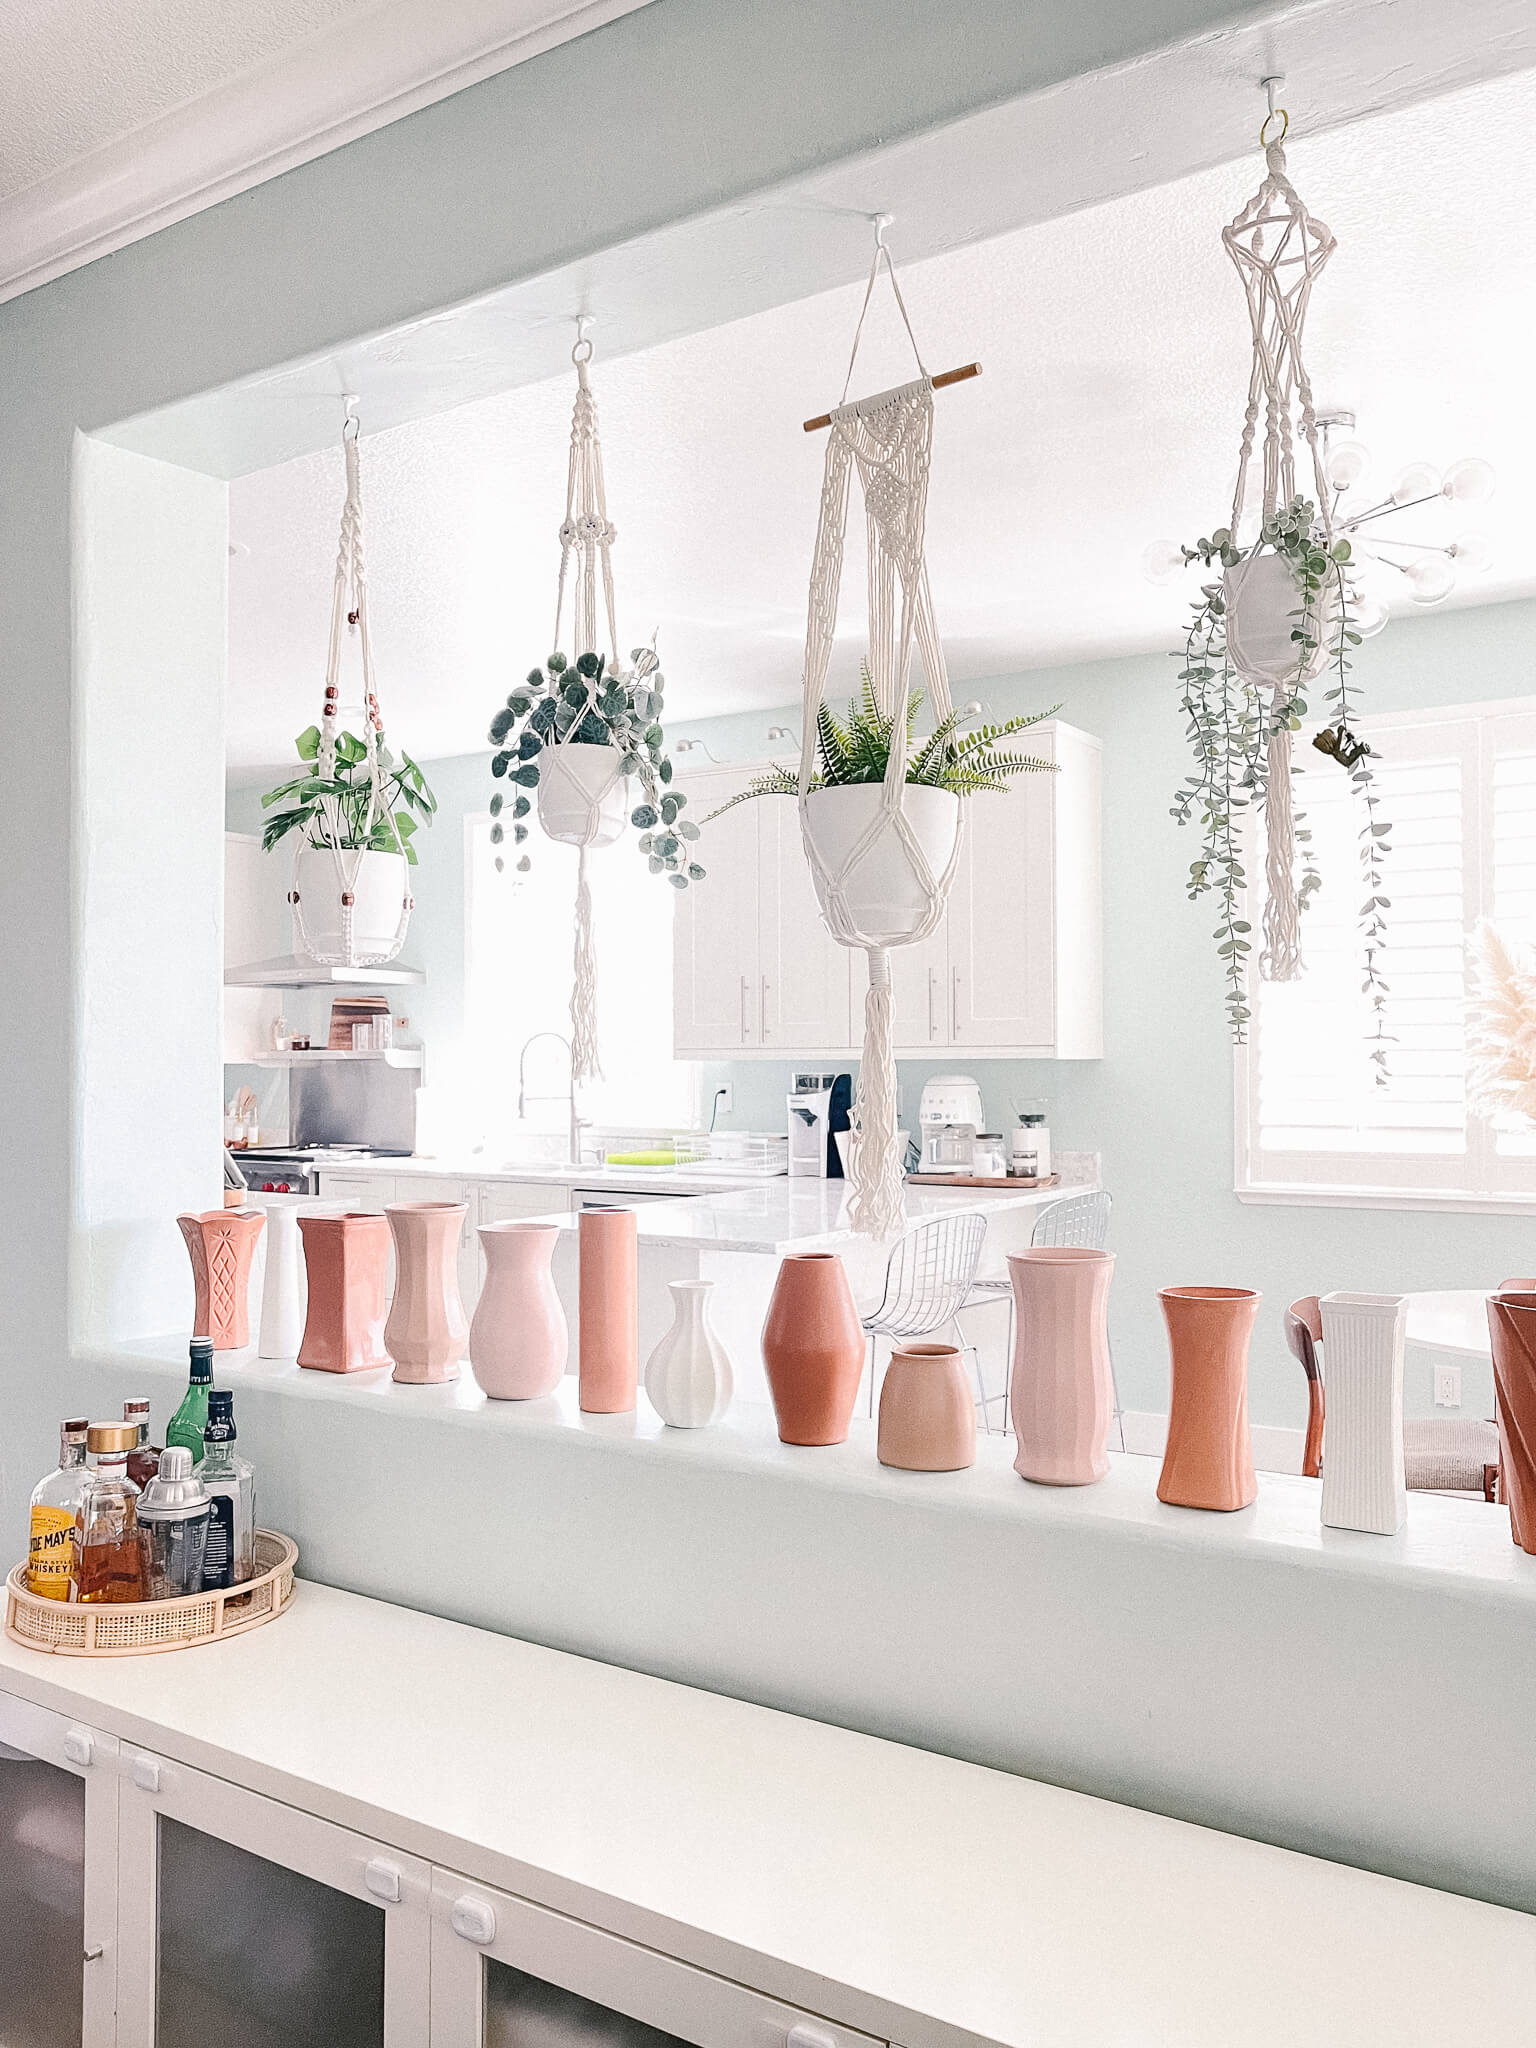 hanging plants and terracotta pottery